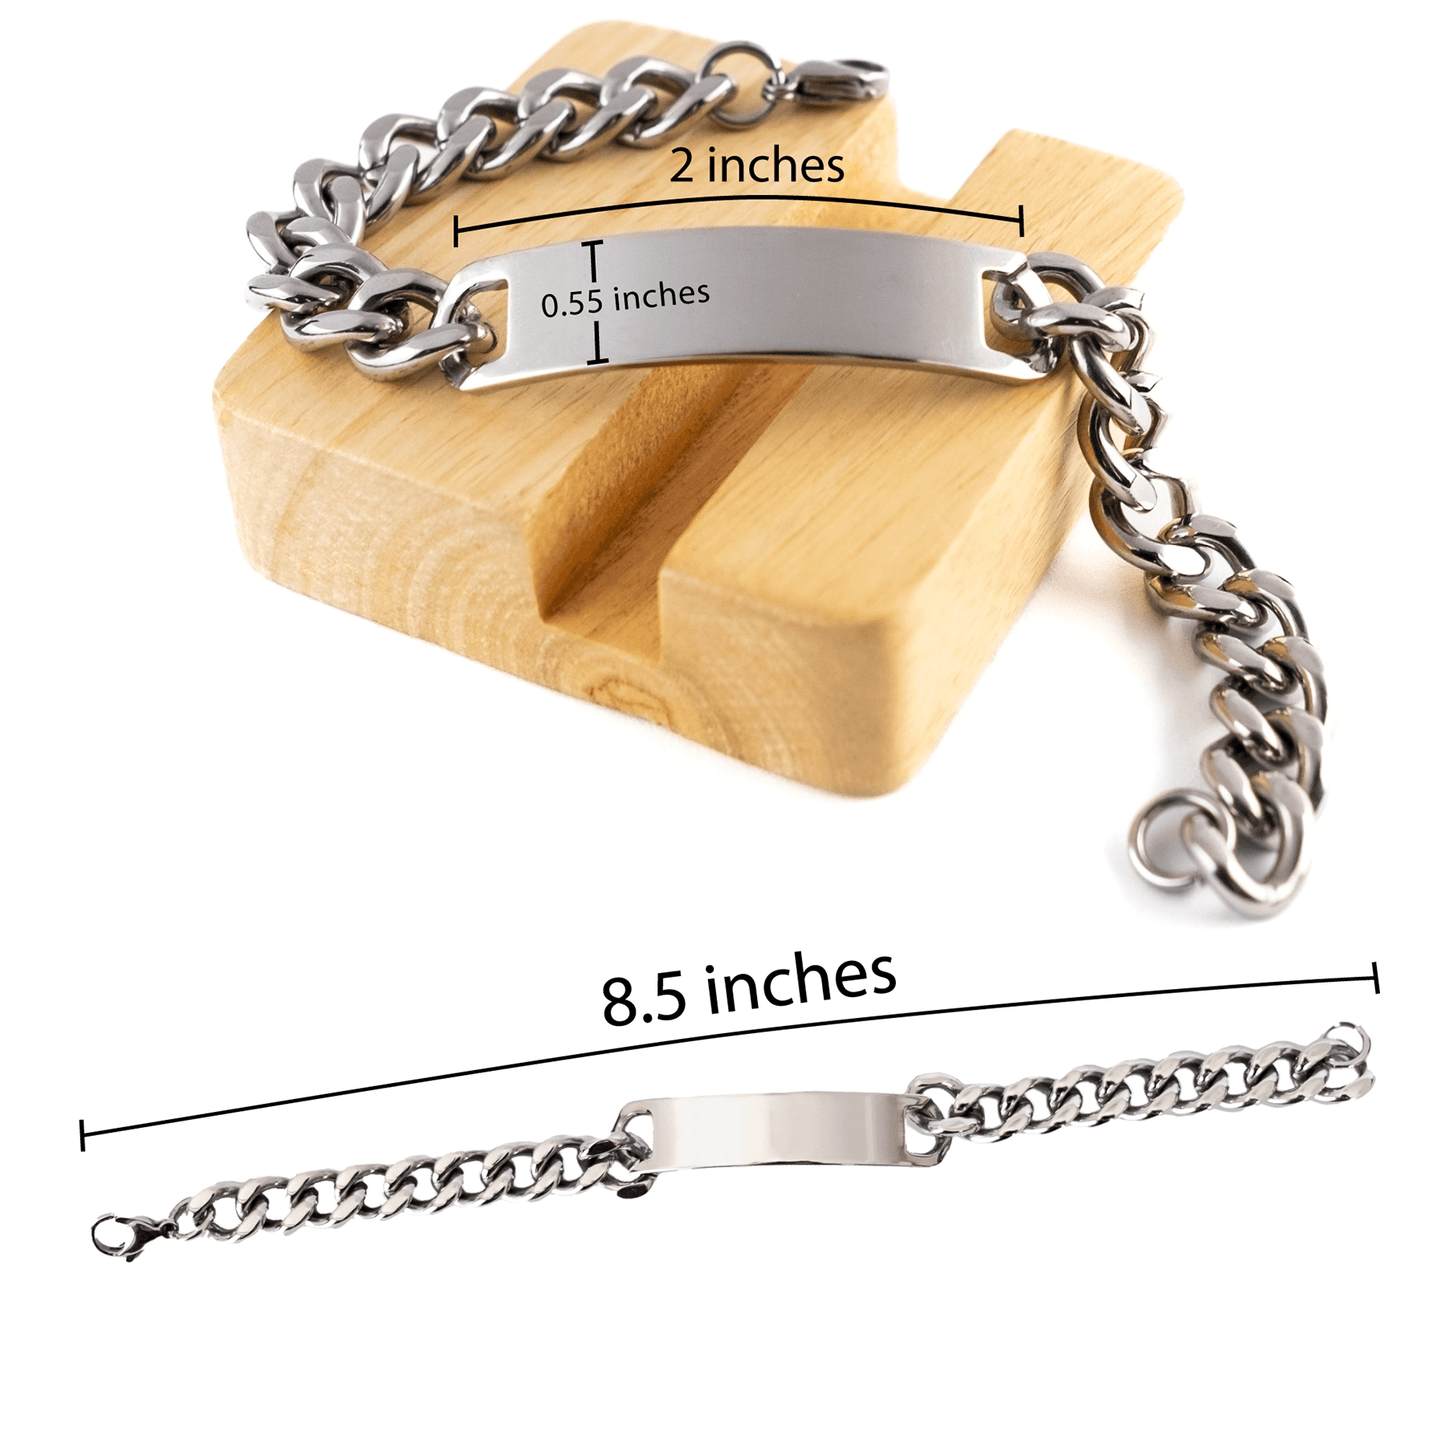 Remarkable Coach Gifts, Your dedication and hard work, Inspirational Birthday Christmas Unique Cuban Chain Stainless Steel Bracelet For Coach, Coworkers, Men, Women, Friends - Mallard Moon Gift Shop